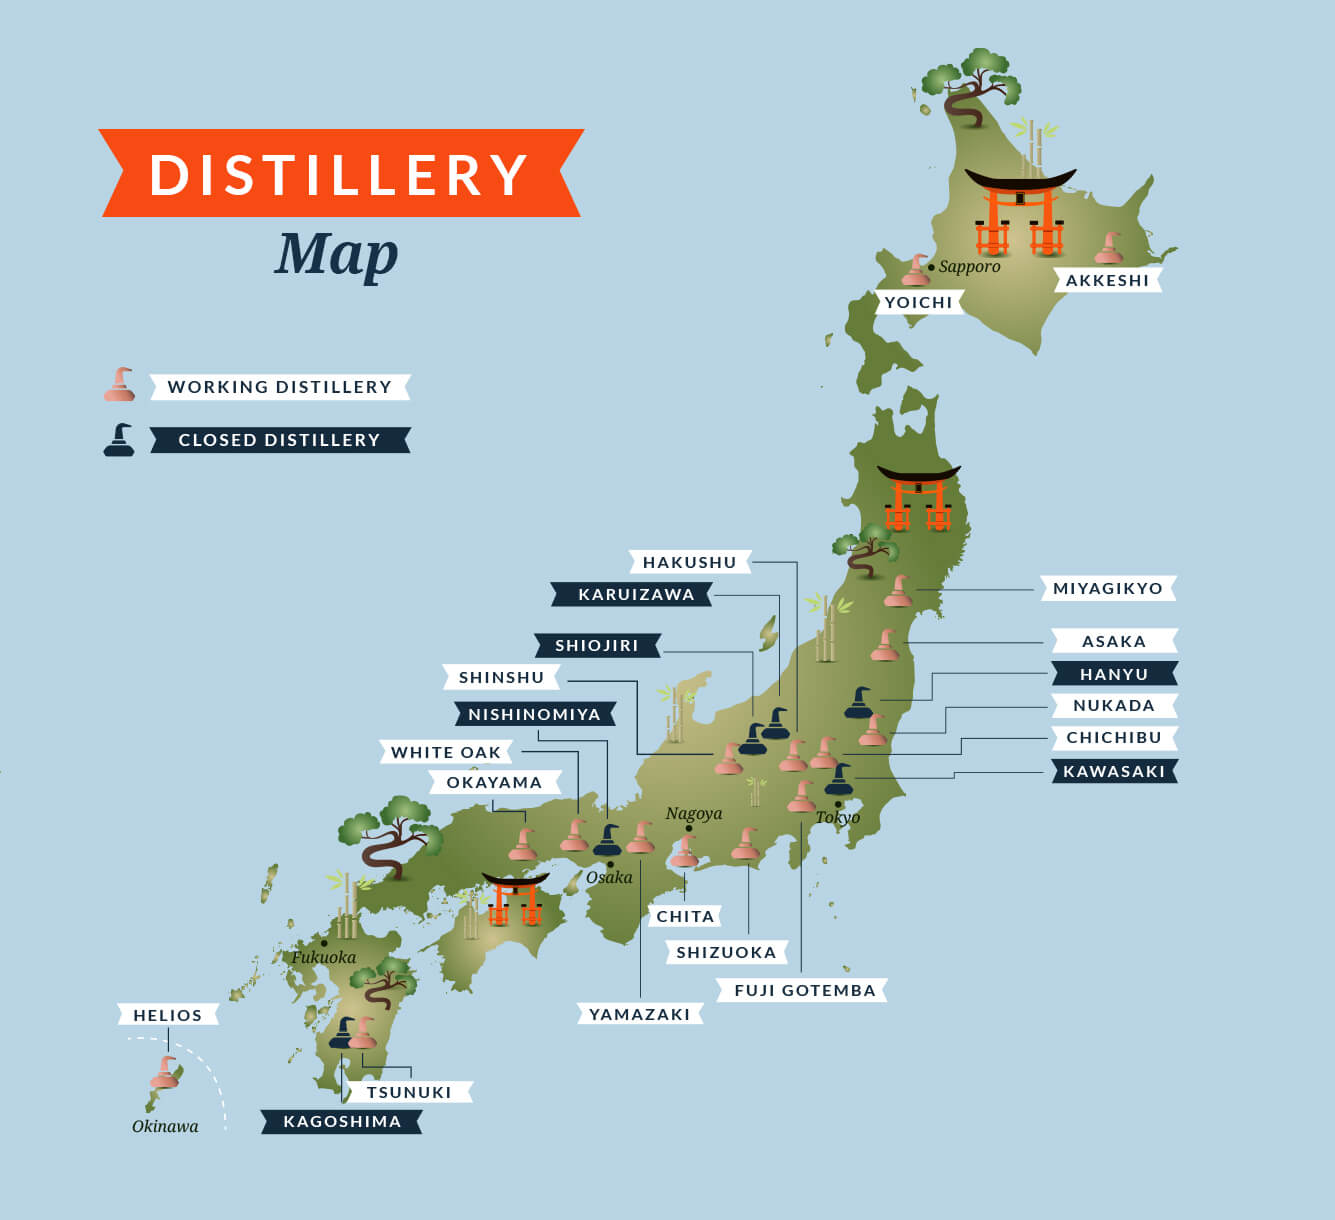 The whisky distilleries of Japan